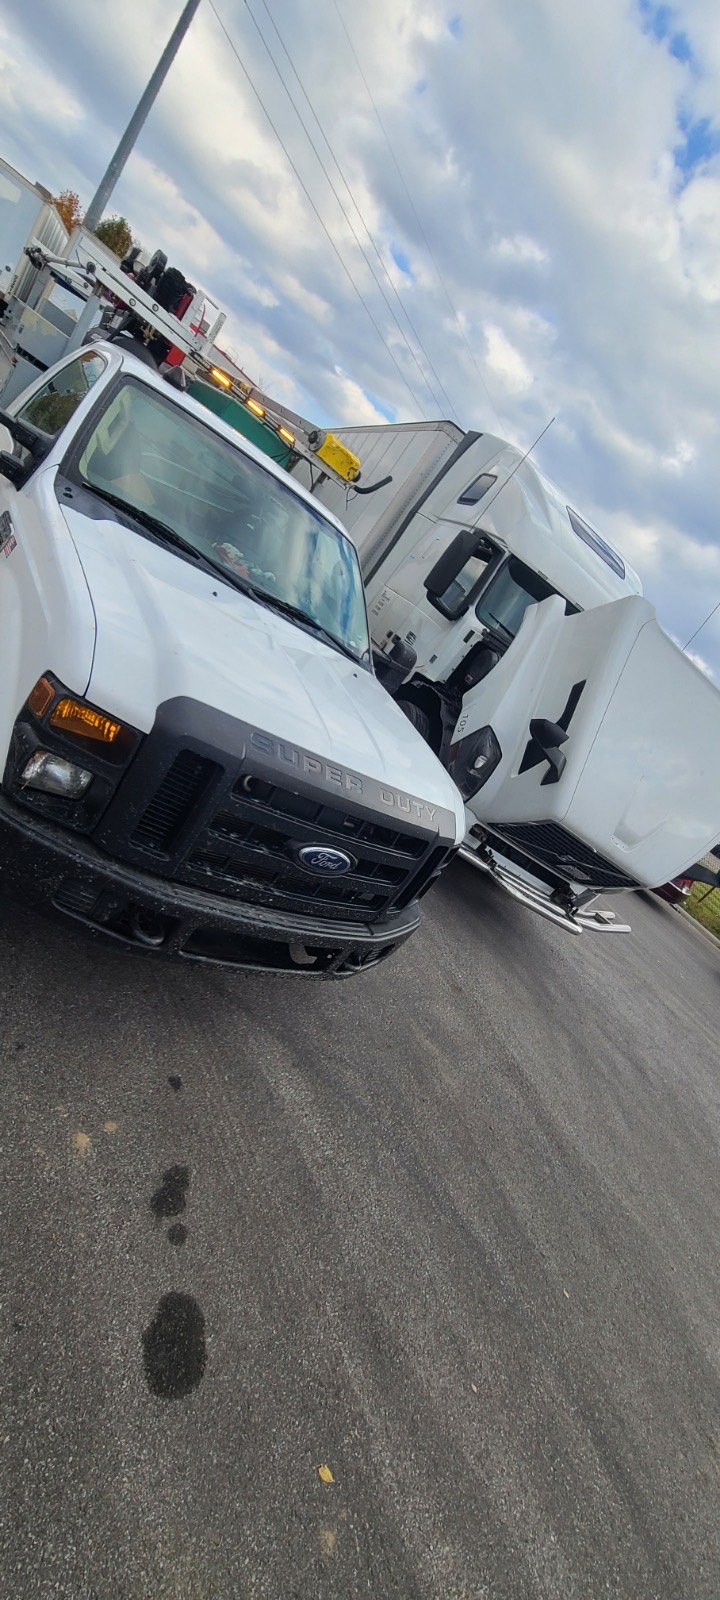 24/7 St Louis Mobile Truck Repair, a St Louis Mobile Truck Repair Company, Provides Top-of-The-Line Mobile Truck Repair Services in St Ann, Missouri